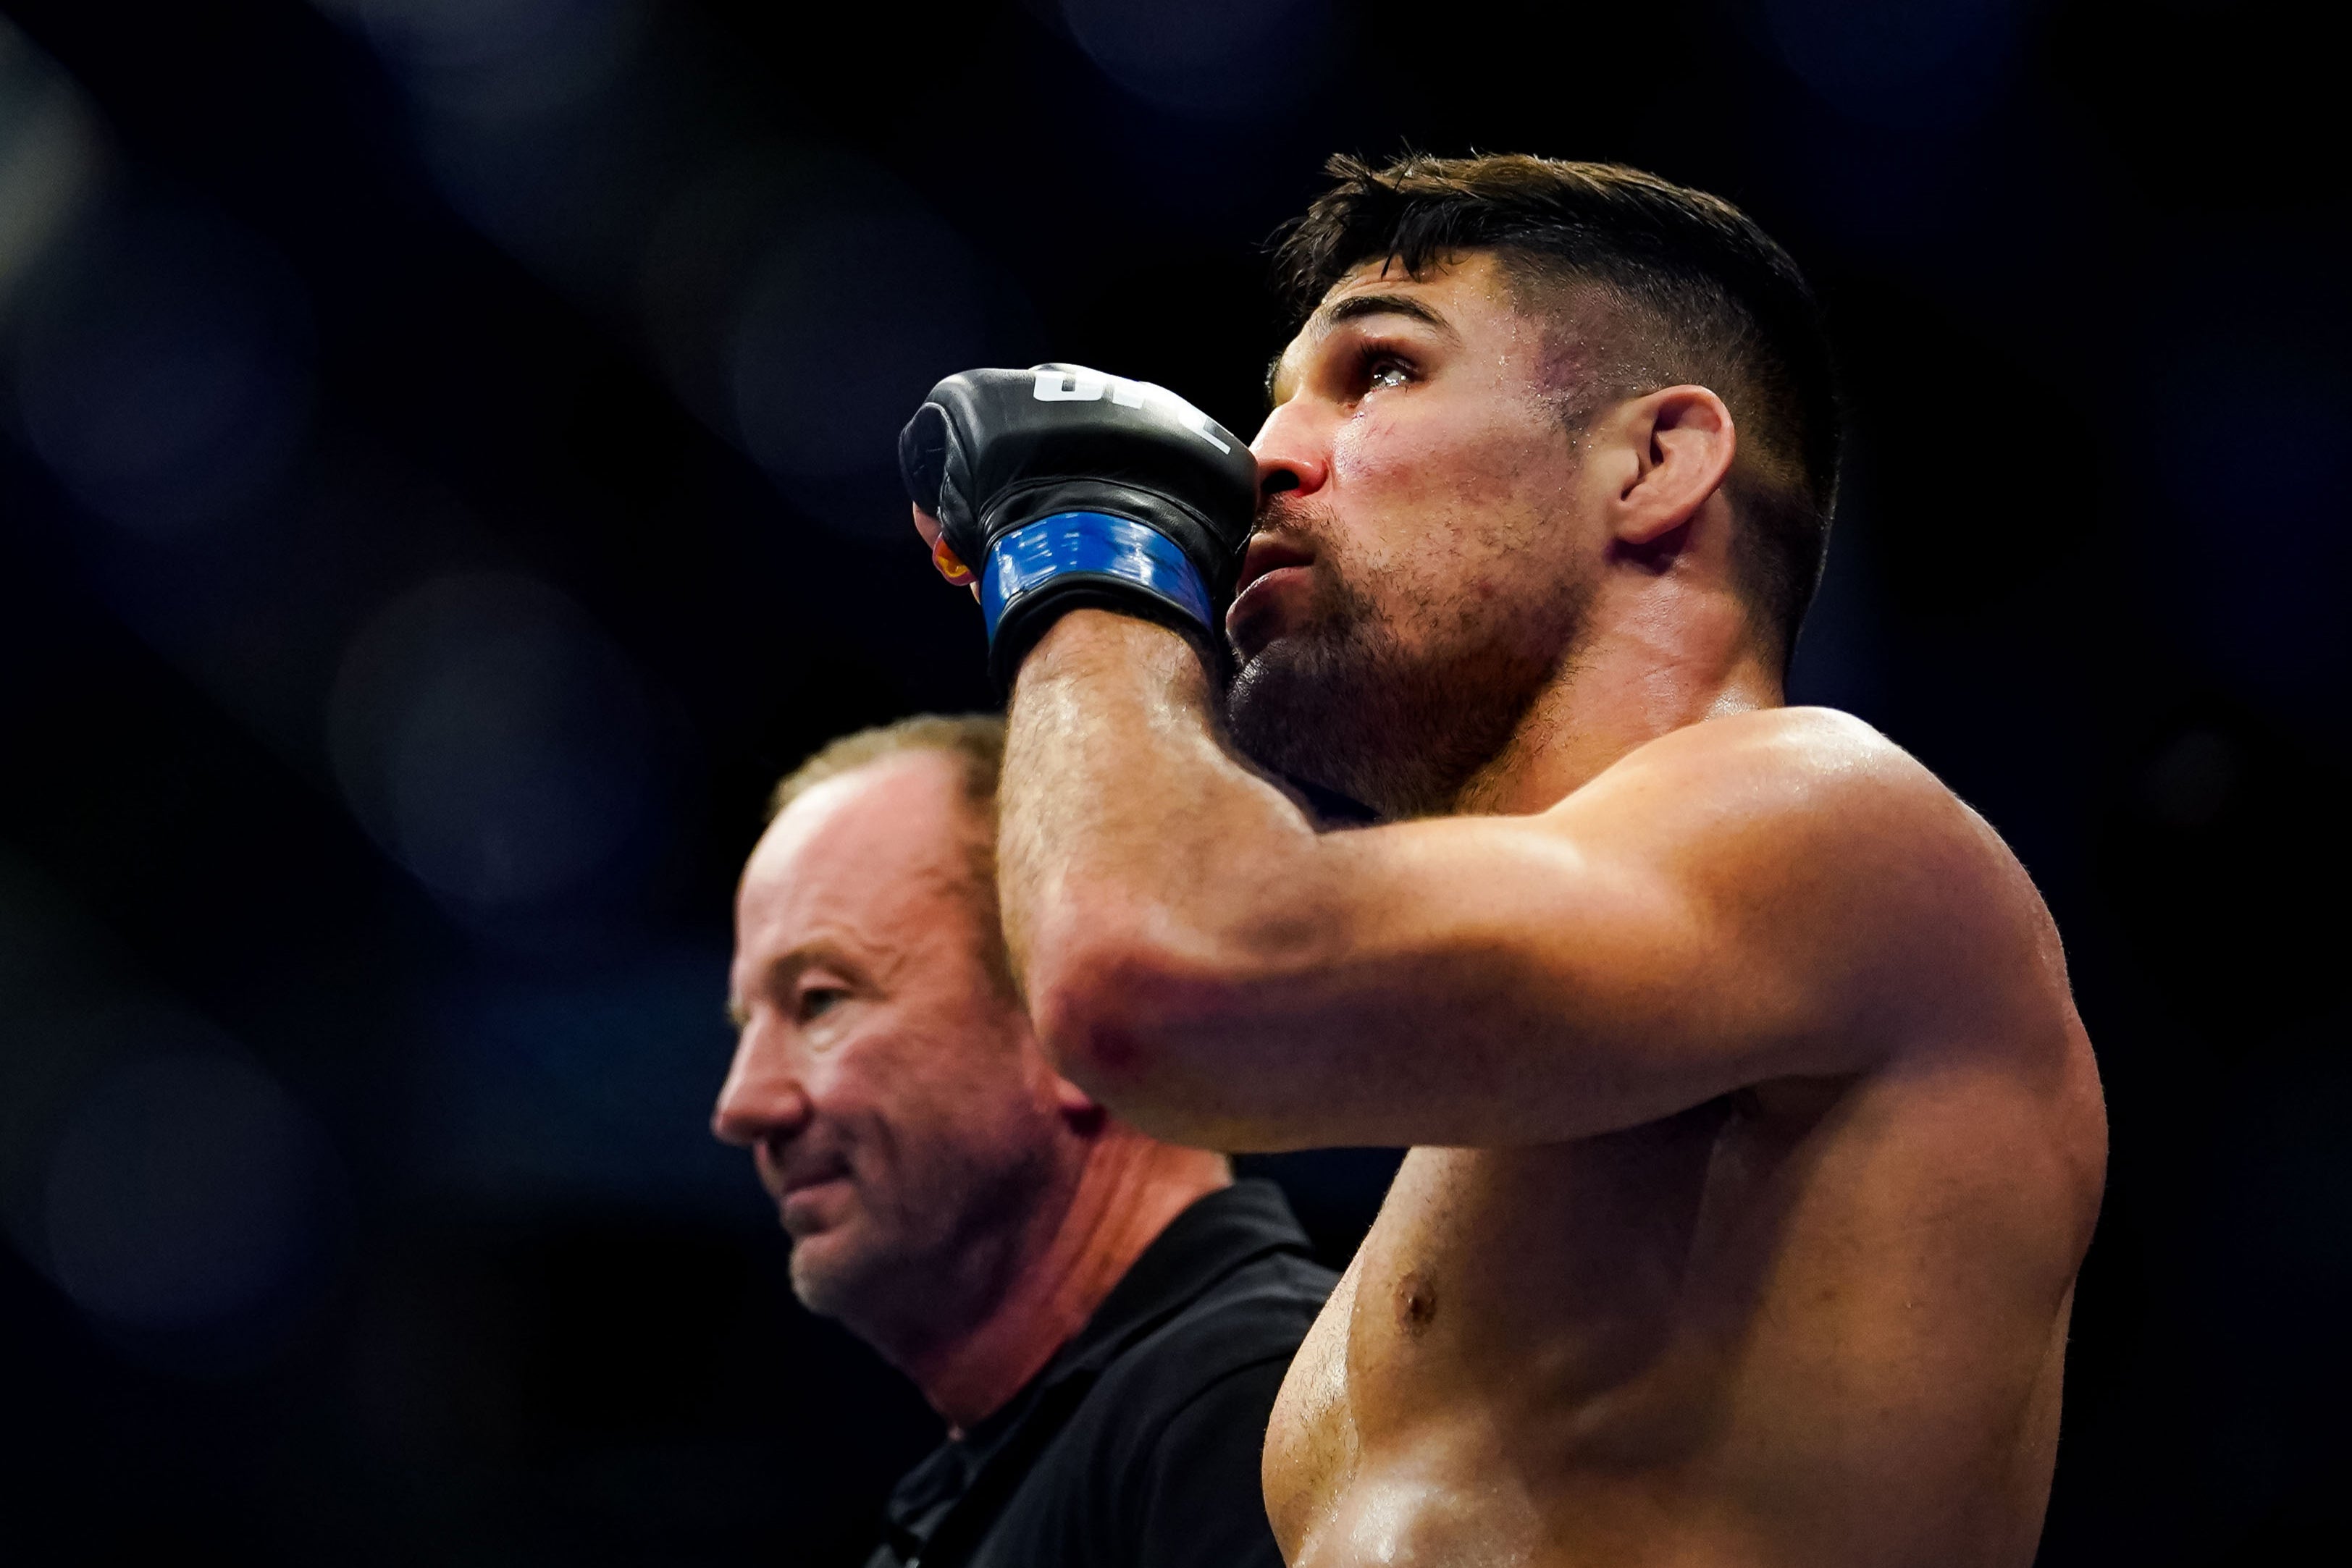 Vicente Luque is a top-10 UFC welterweight and ex-teammate of Machado Garry